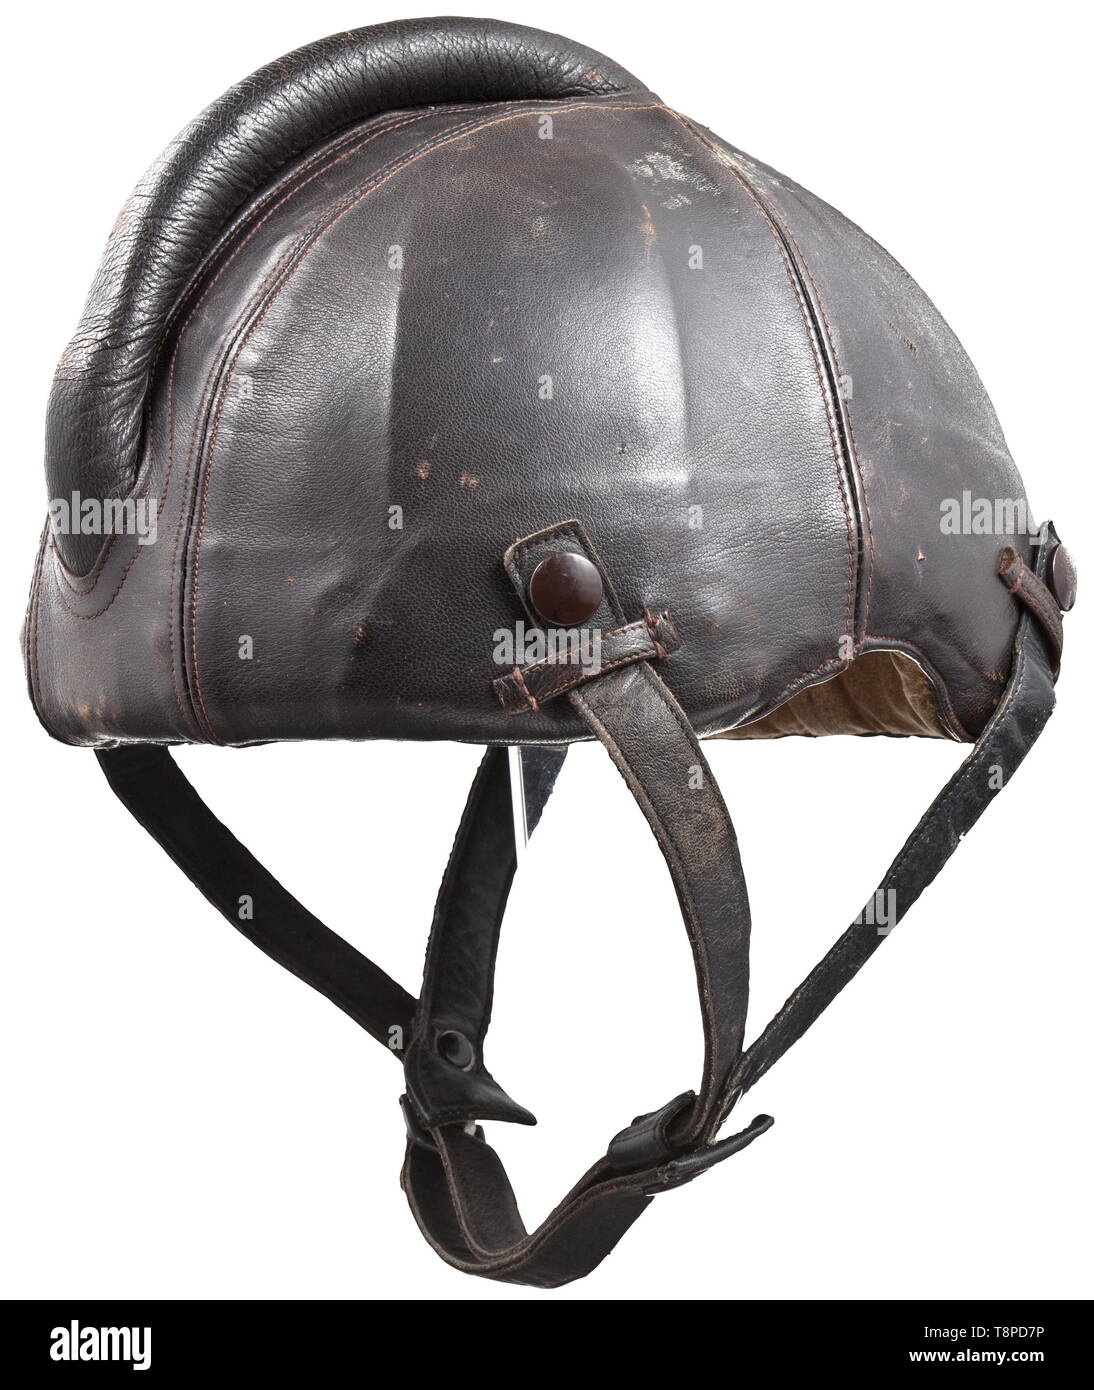 A steel flight helmet Baumuster SSK 90 Skull of riveted steel plates with brown leather cover, protective bulge sewn and padded, attachment loops. Chinstraps of a different colour, with press button attachment. The lining made from the same sand-coloured mottled linen as the flying suits, with sewn maker's label 'Siemens - Baumuster SSK 90 - Hersteller Luftfahrtgerätewerk Hakenfelde GMBH - Striwa - Kopfgröße 60-62' (tr. 'Siemens - model SSK 90 - manufacturer Luftfahrtgerätewerk Hakenfelde GMBH - Striwa - head size 60-62'). historic, historical, Air Force, branch of service,, Editorial-Use-Only Stock Photo